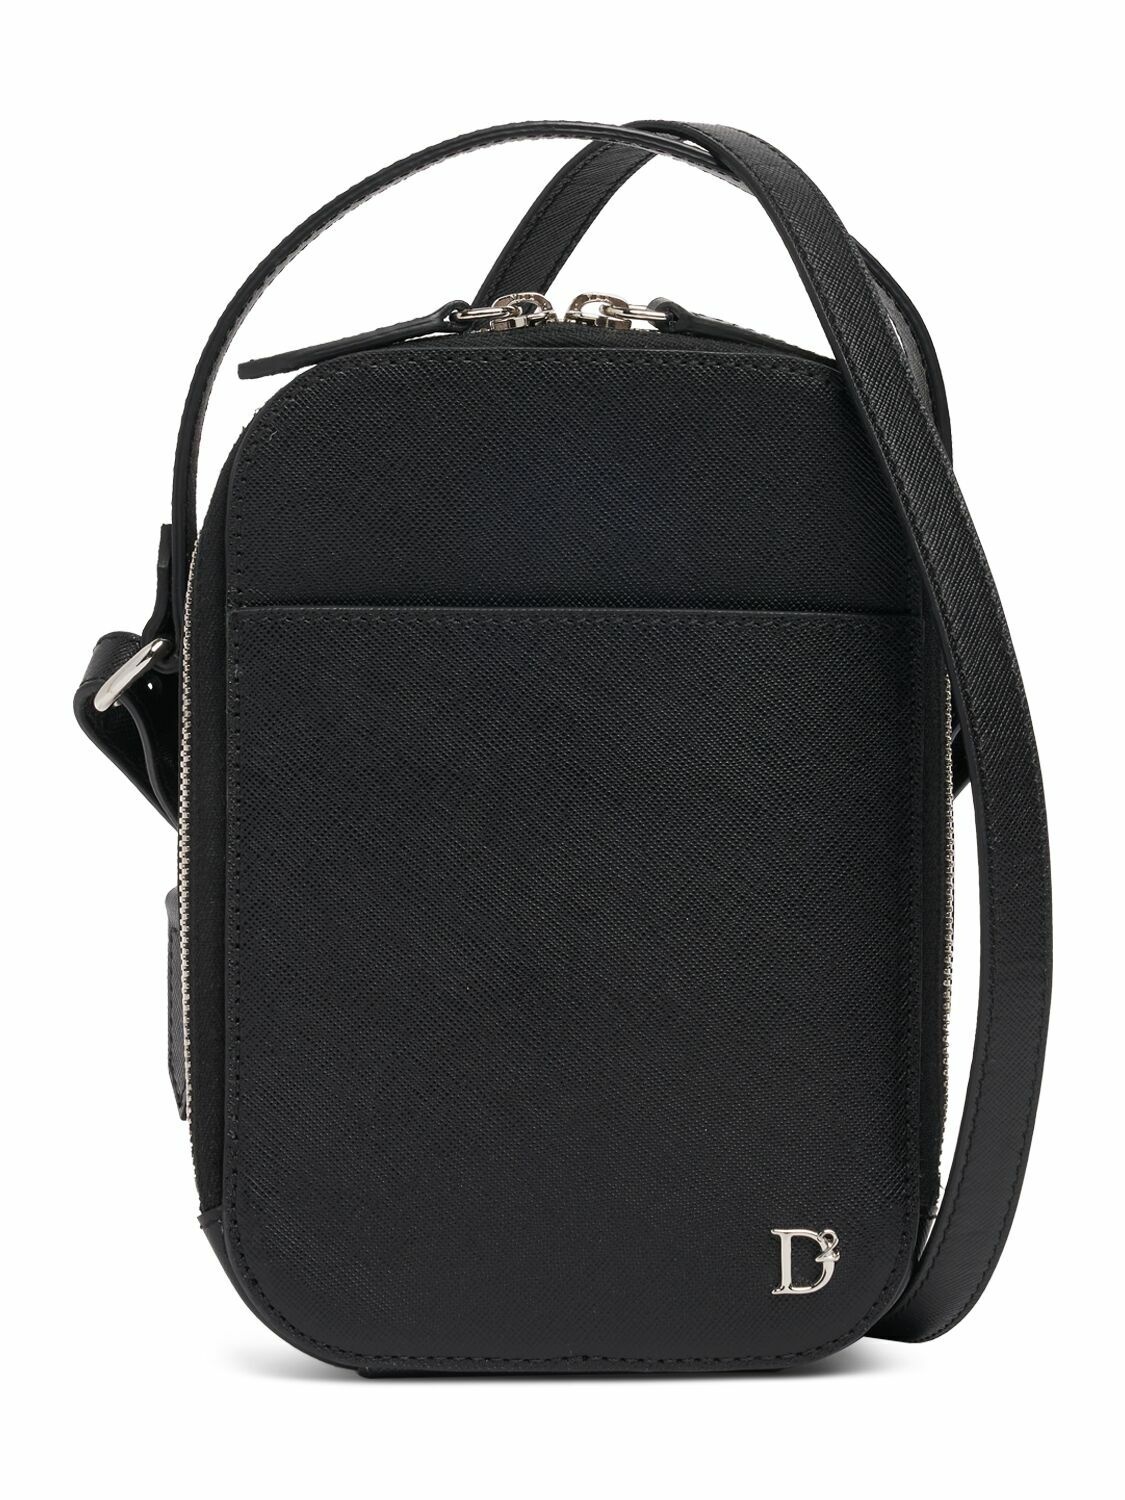 Photo: DSQUARED2 - D2 Leather Crossbody Bag